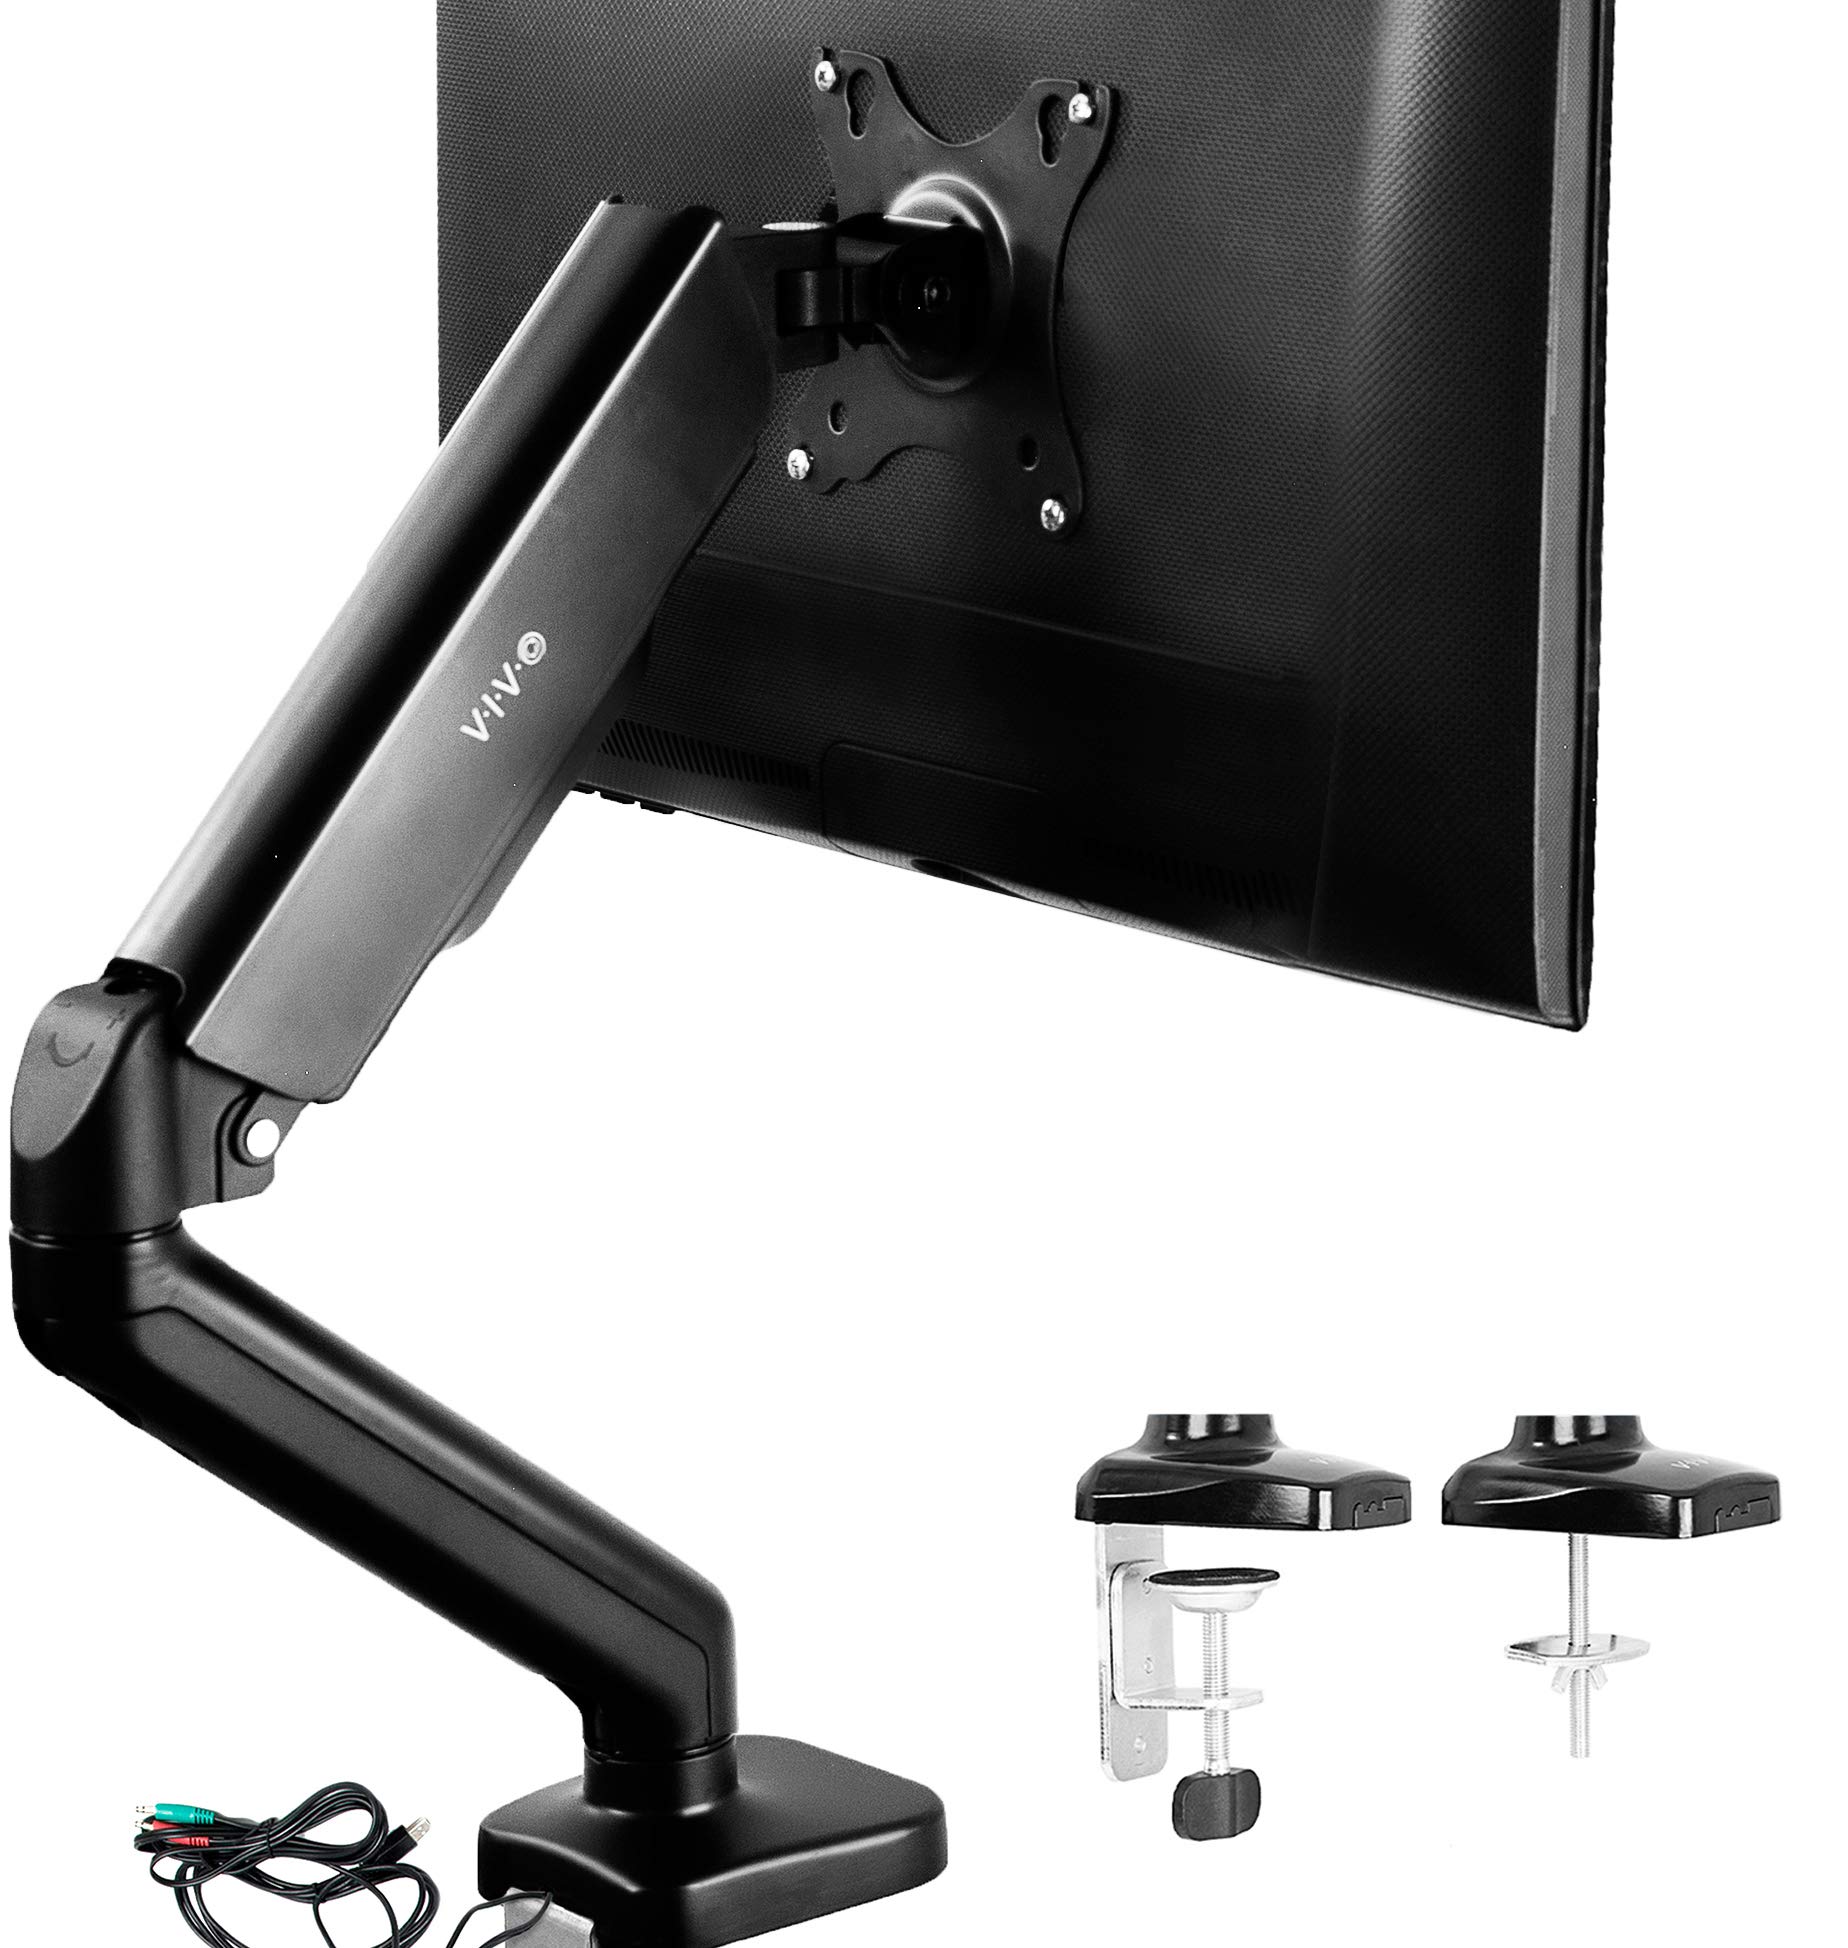 VIVO Single Monitor Height Adjustable Counterbalance Pneumatic Desk Mount Stand with USB and Audio Ports, Universal Fits Screens up to 27 inches ST...